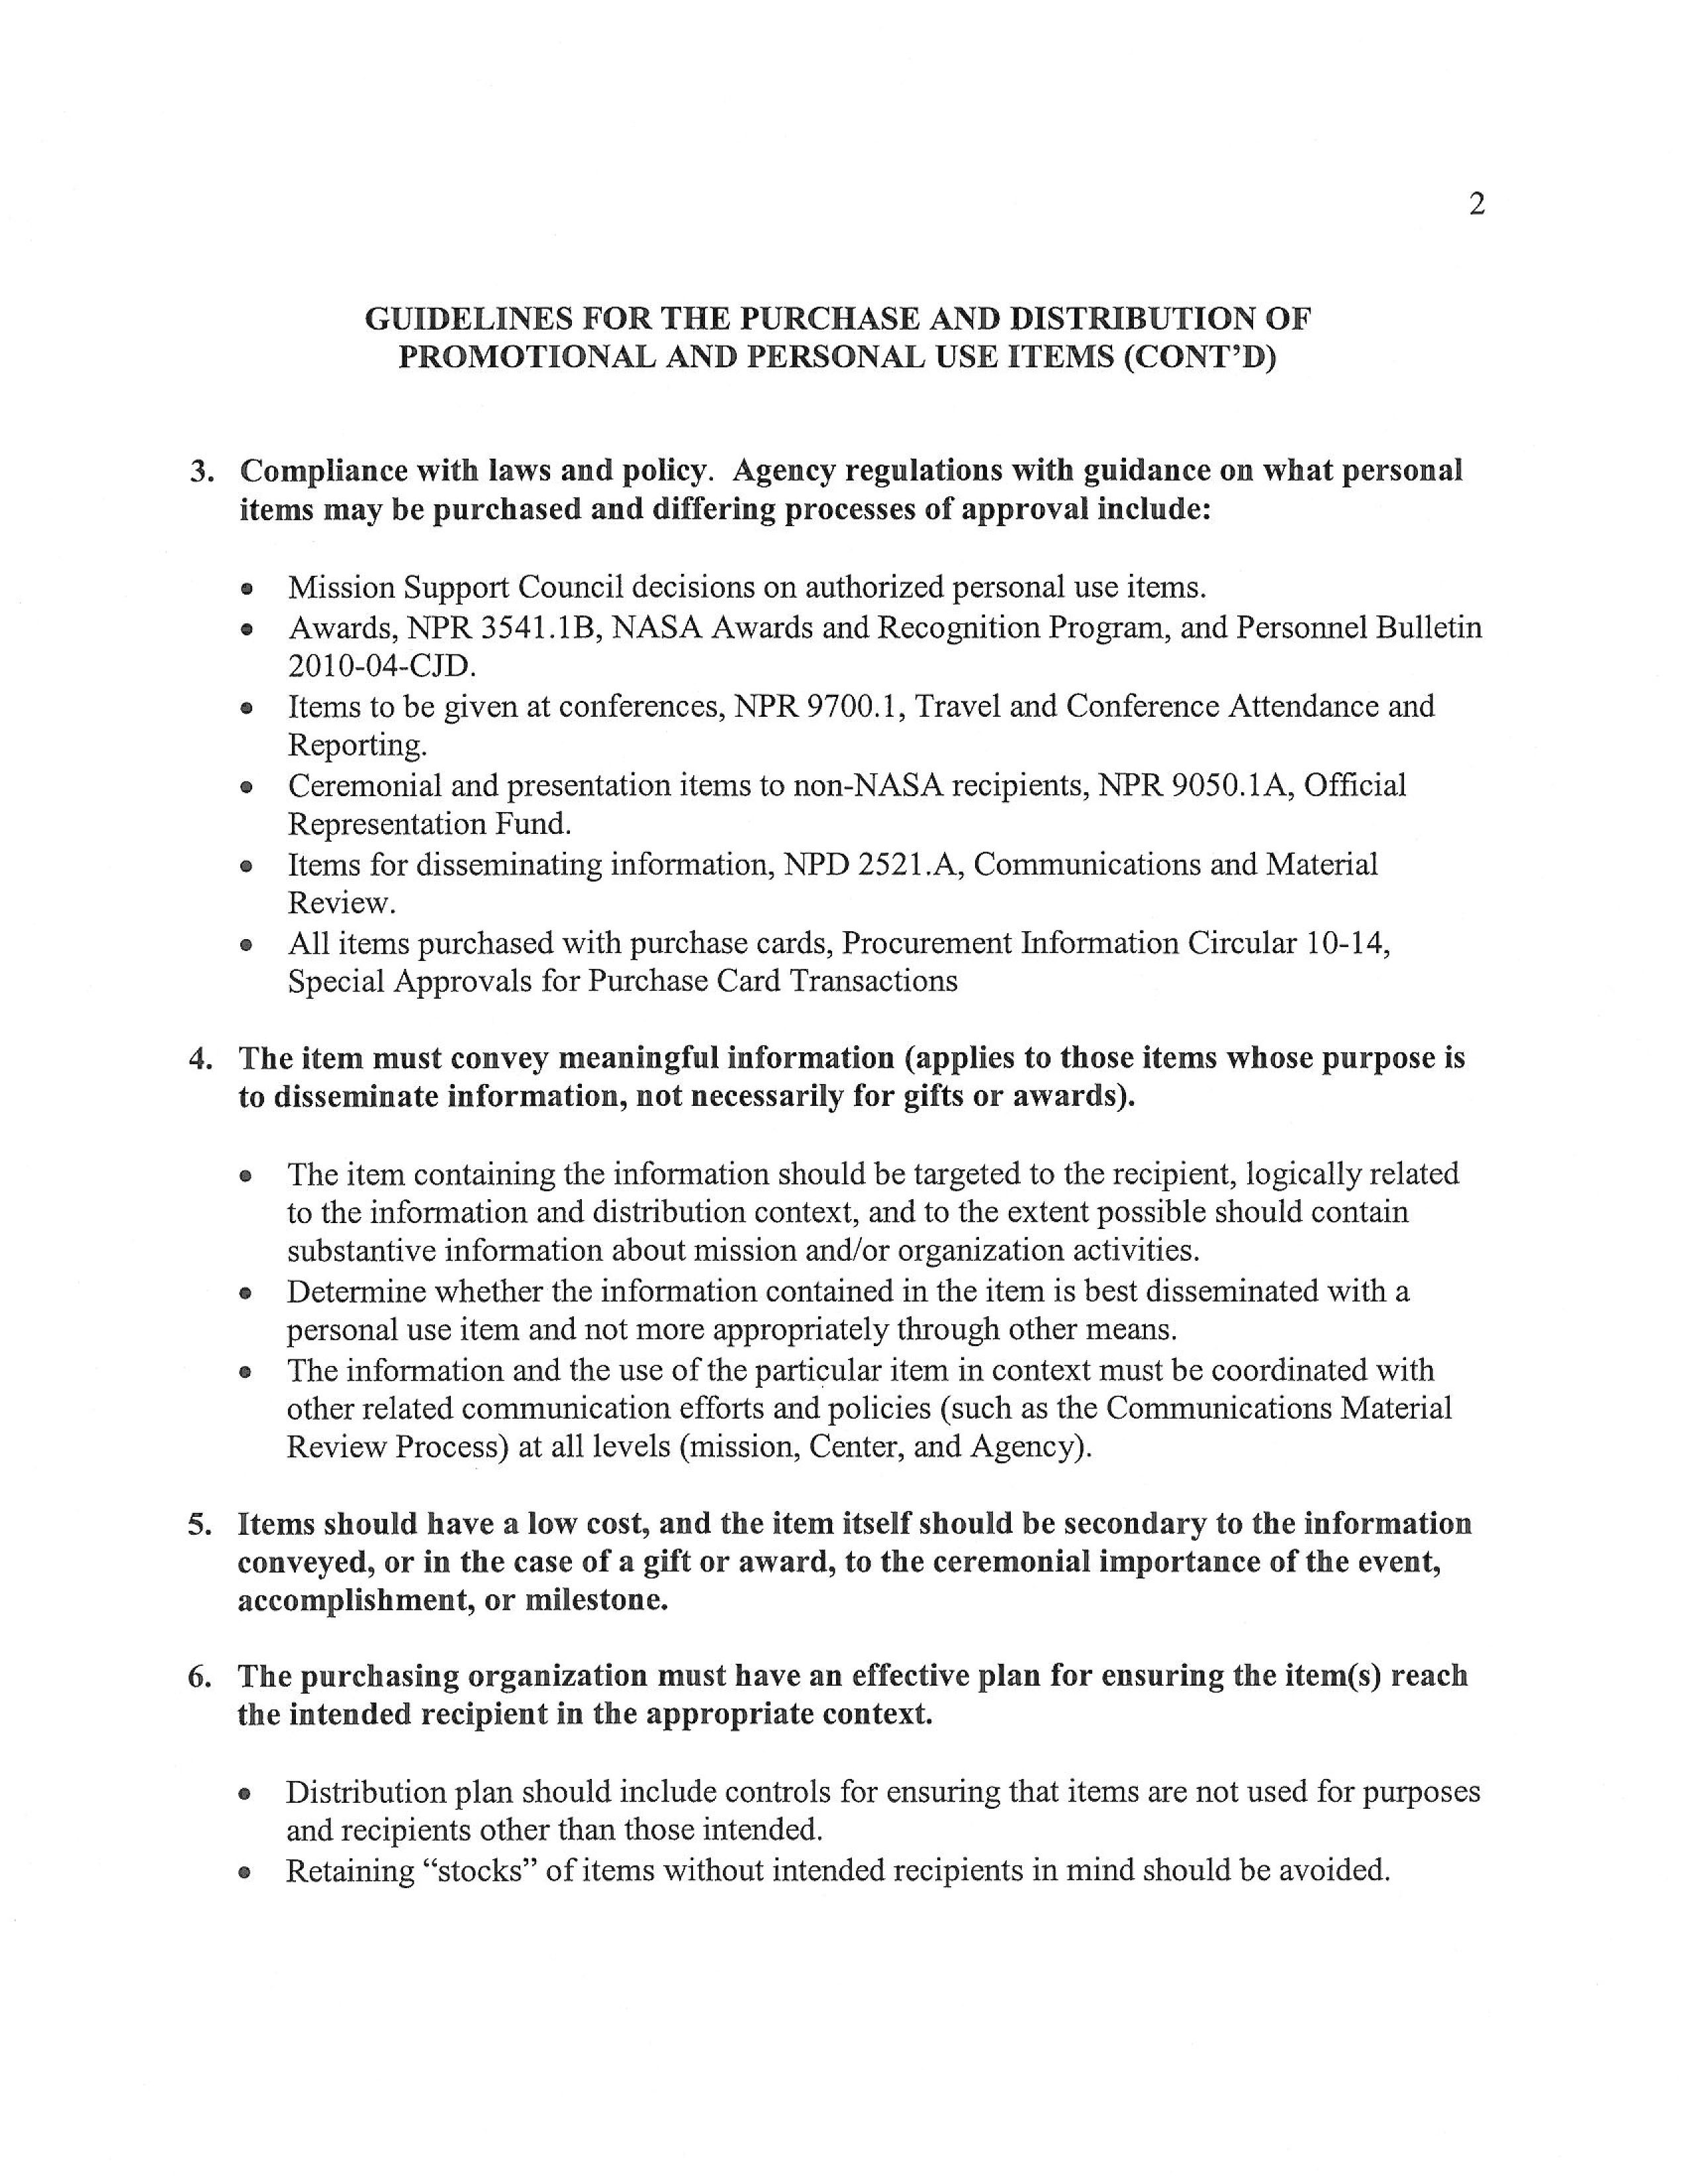 Image shows page 4 of the NASA Personal Property Disposal Procedural Requirements memo from the Office of the NASA Administrator dated April 16, 2012.